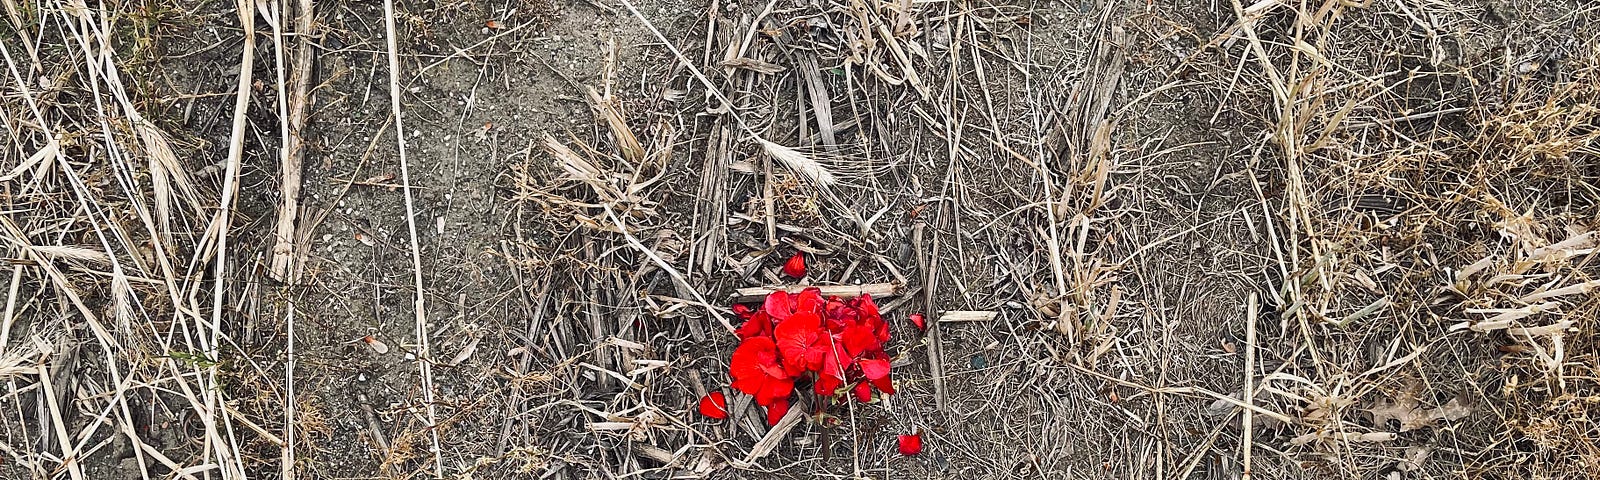 Burning, blazing, blood red geraniums spilled into a dry, brown hay field, which has already been mowed for the season. The author is not sure how these ended up here.